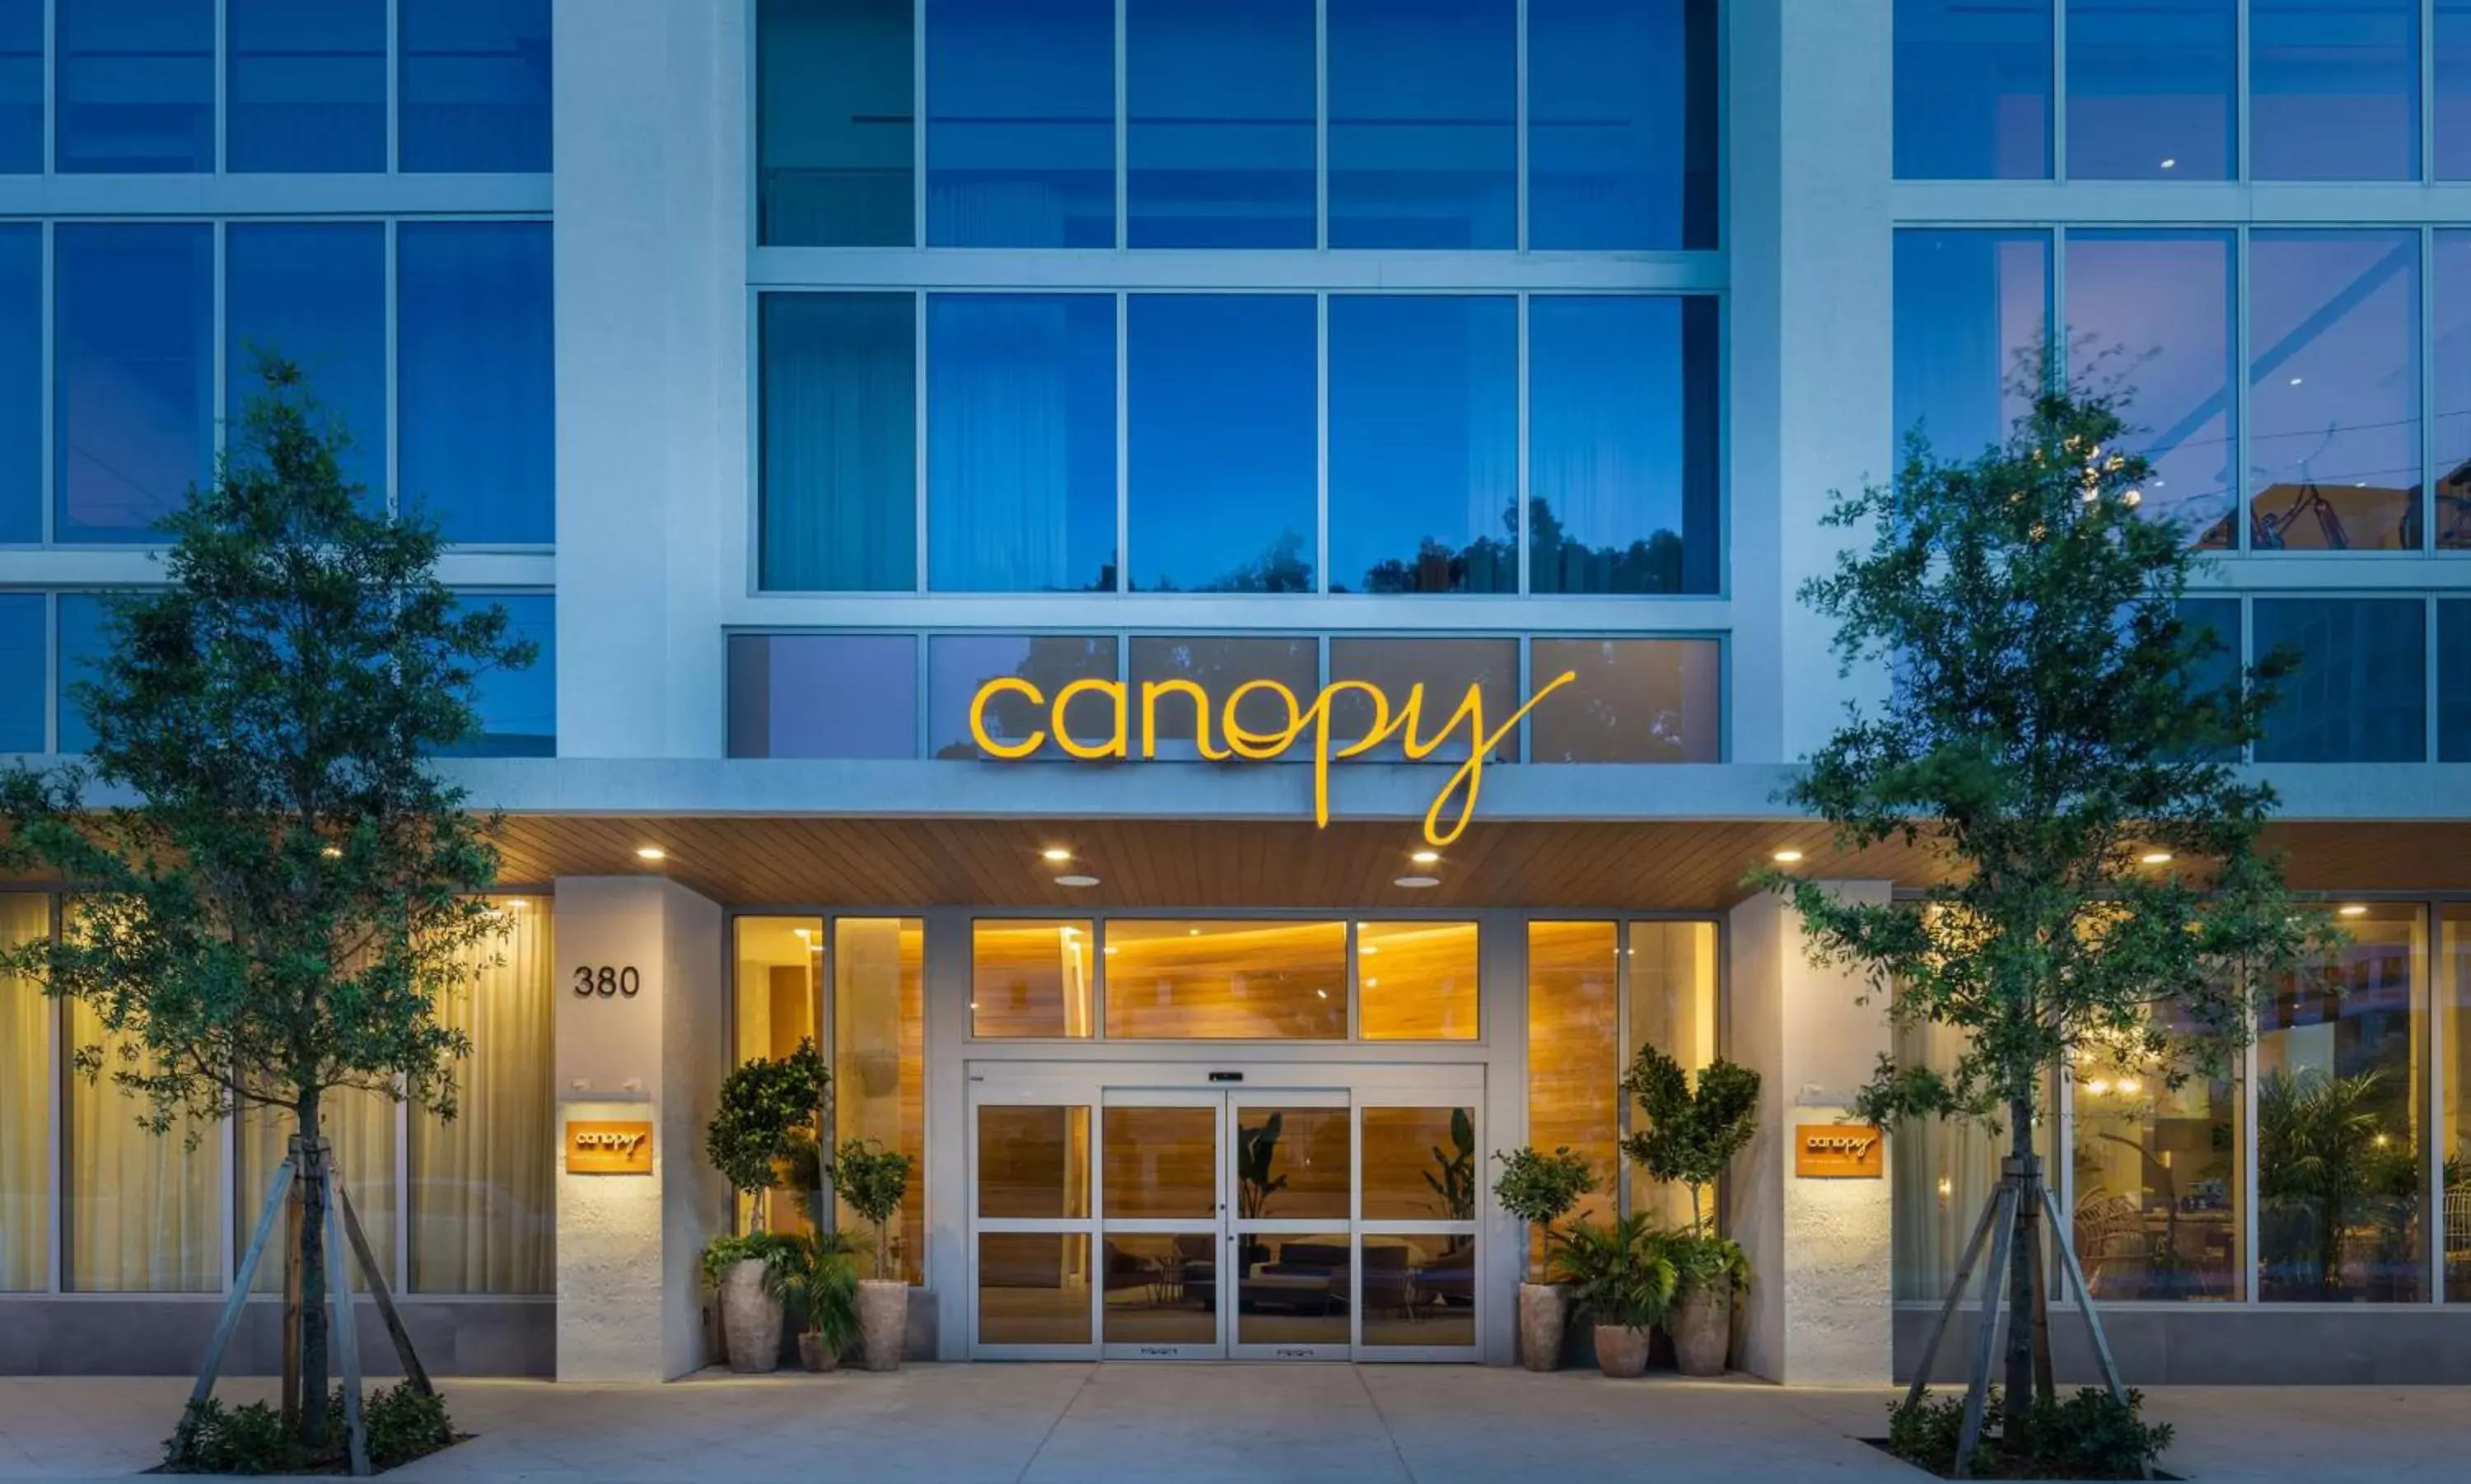 Property building in Canopy West Palm Beach - Downtown